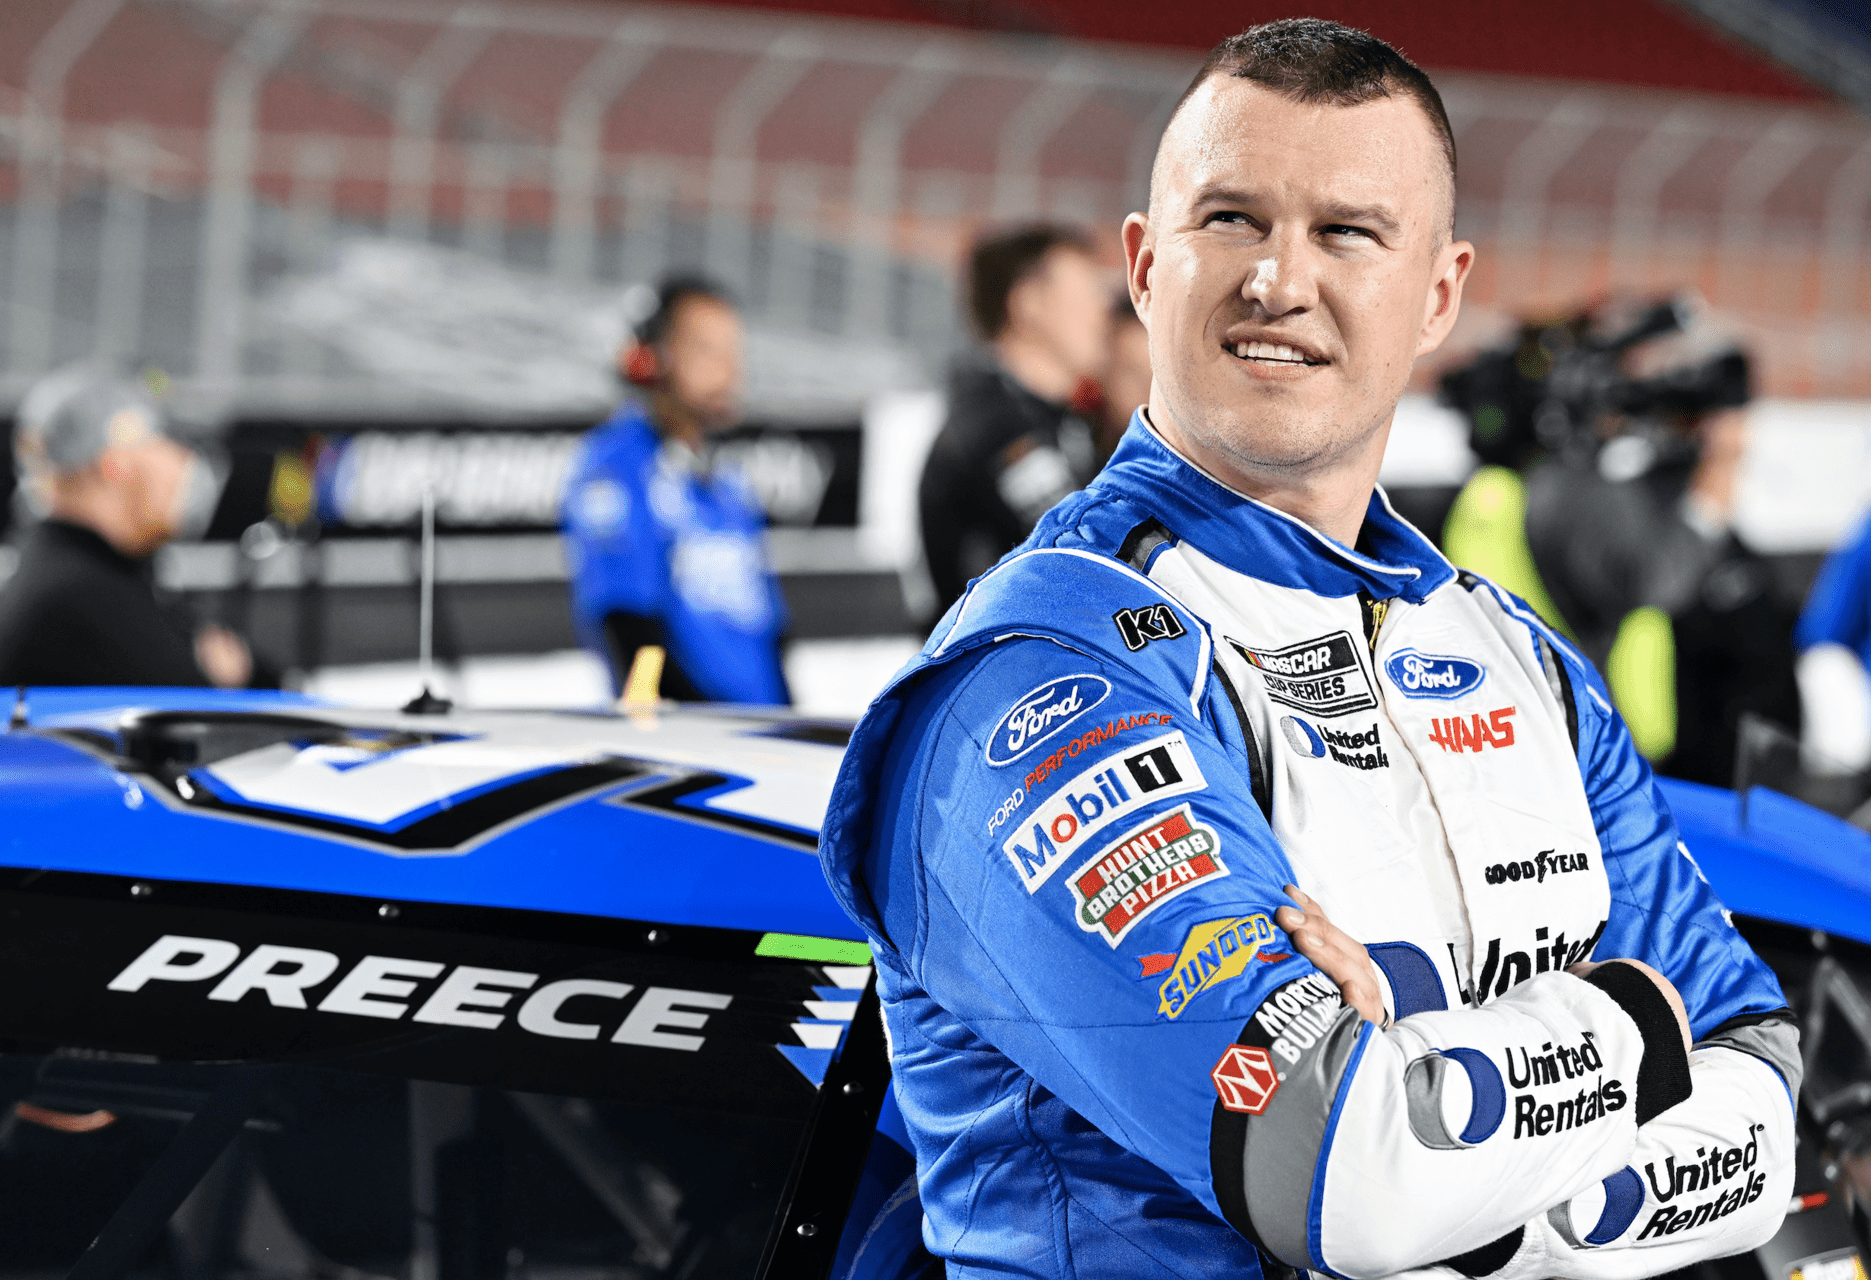 Ryan Preece looks to keep his momentum rolling into the second race of the NASCAR Cup Series season at Auto Club Speedway.